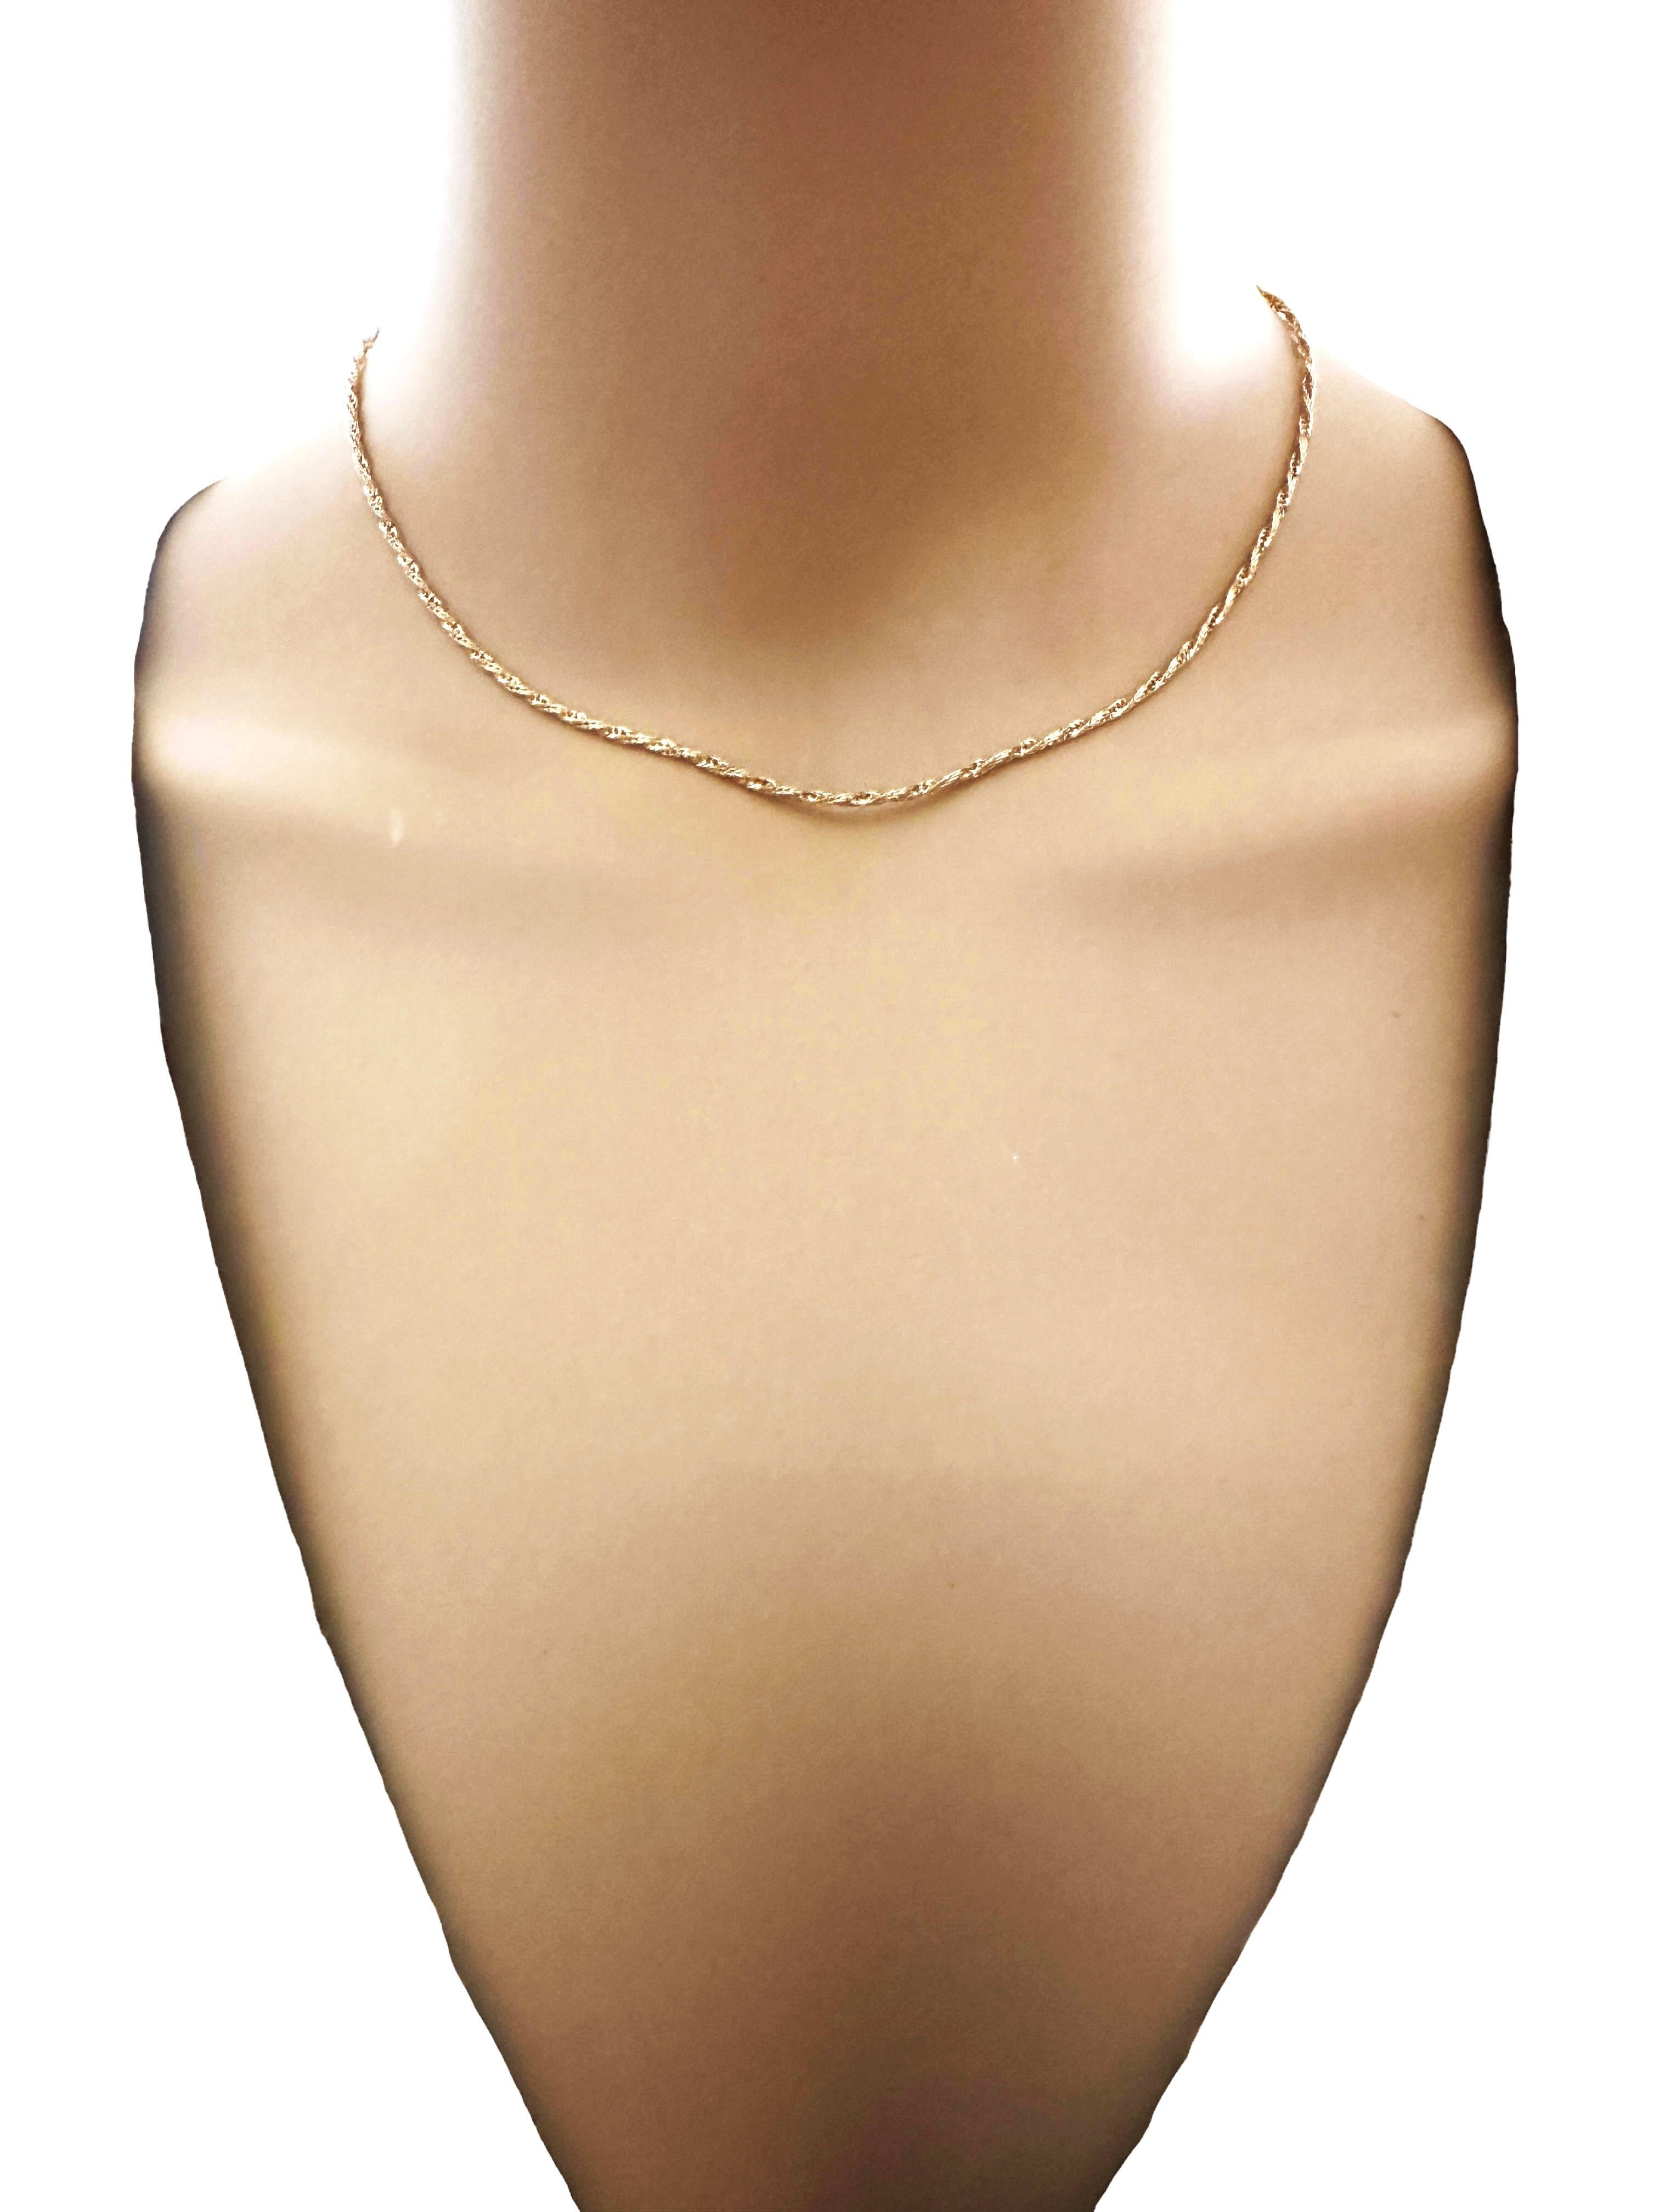 18k Yellow Gold Italian Unoaerre Necklace Chain 15.5 inches In Excellent Condition For Sale In Eagan, MN